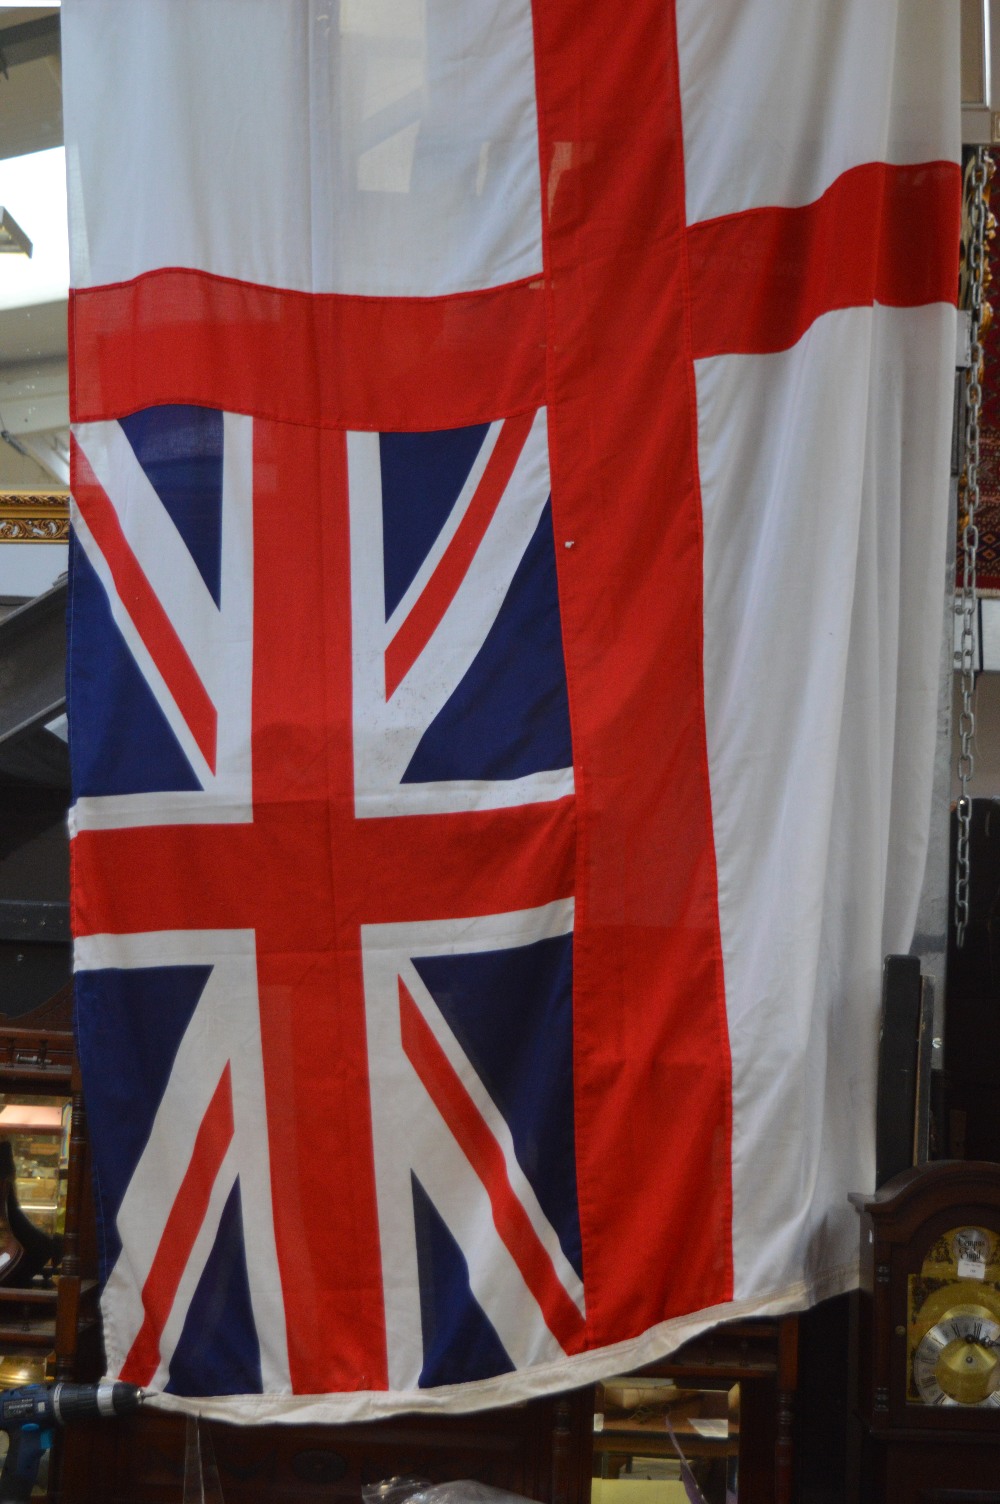 A very large naval ensign approx 320 x 190cm.